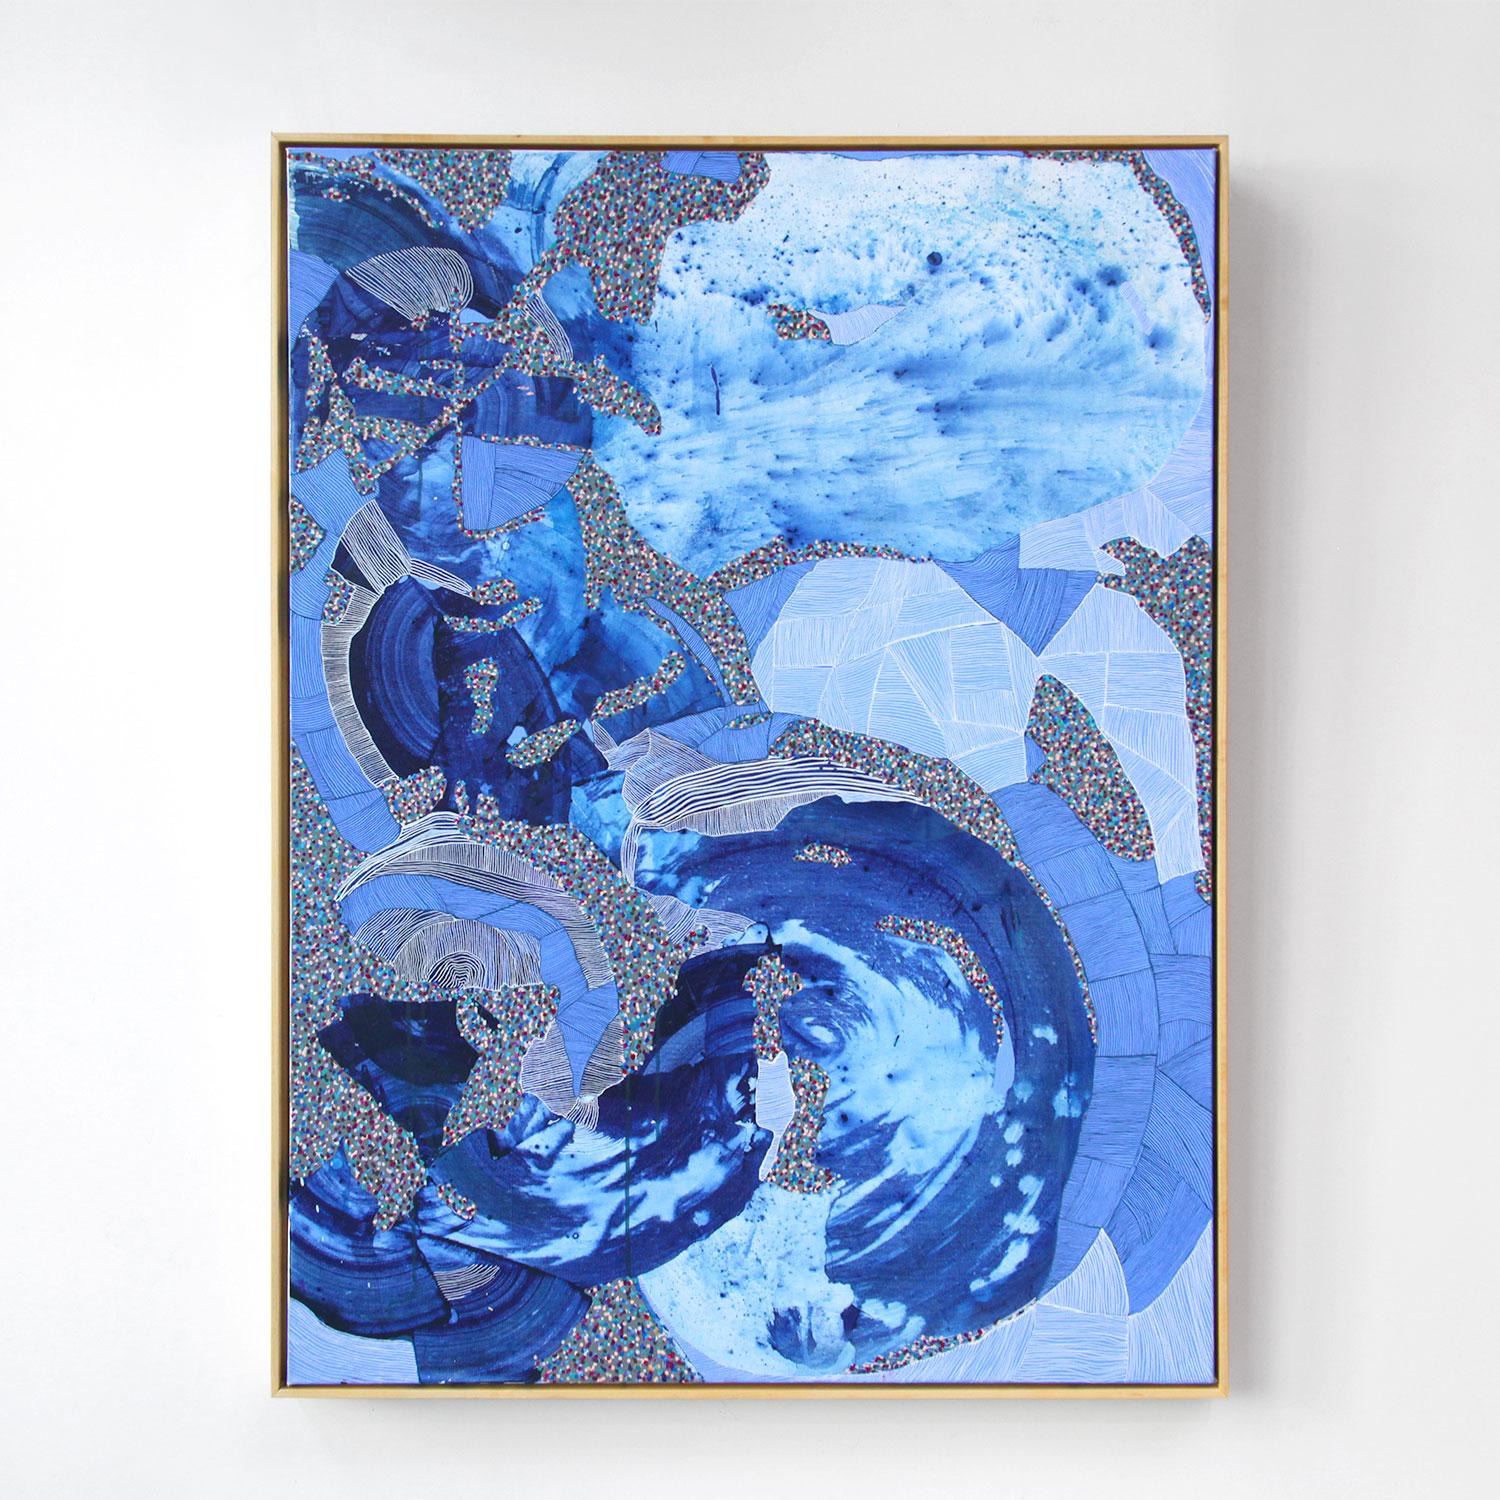 This is a one of a kind abstract expressionist painting by local San Diego artist, Kelsey Overstreet. It is acrylic on canvas and its dimensions are 37 x49 x2.5. It comes framed.

The artist uses multiple shades of blue accompanied with a rainbow